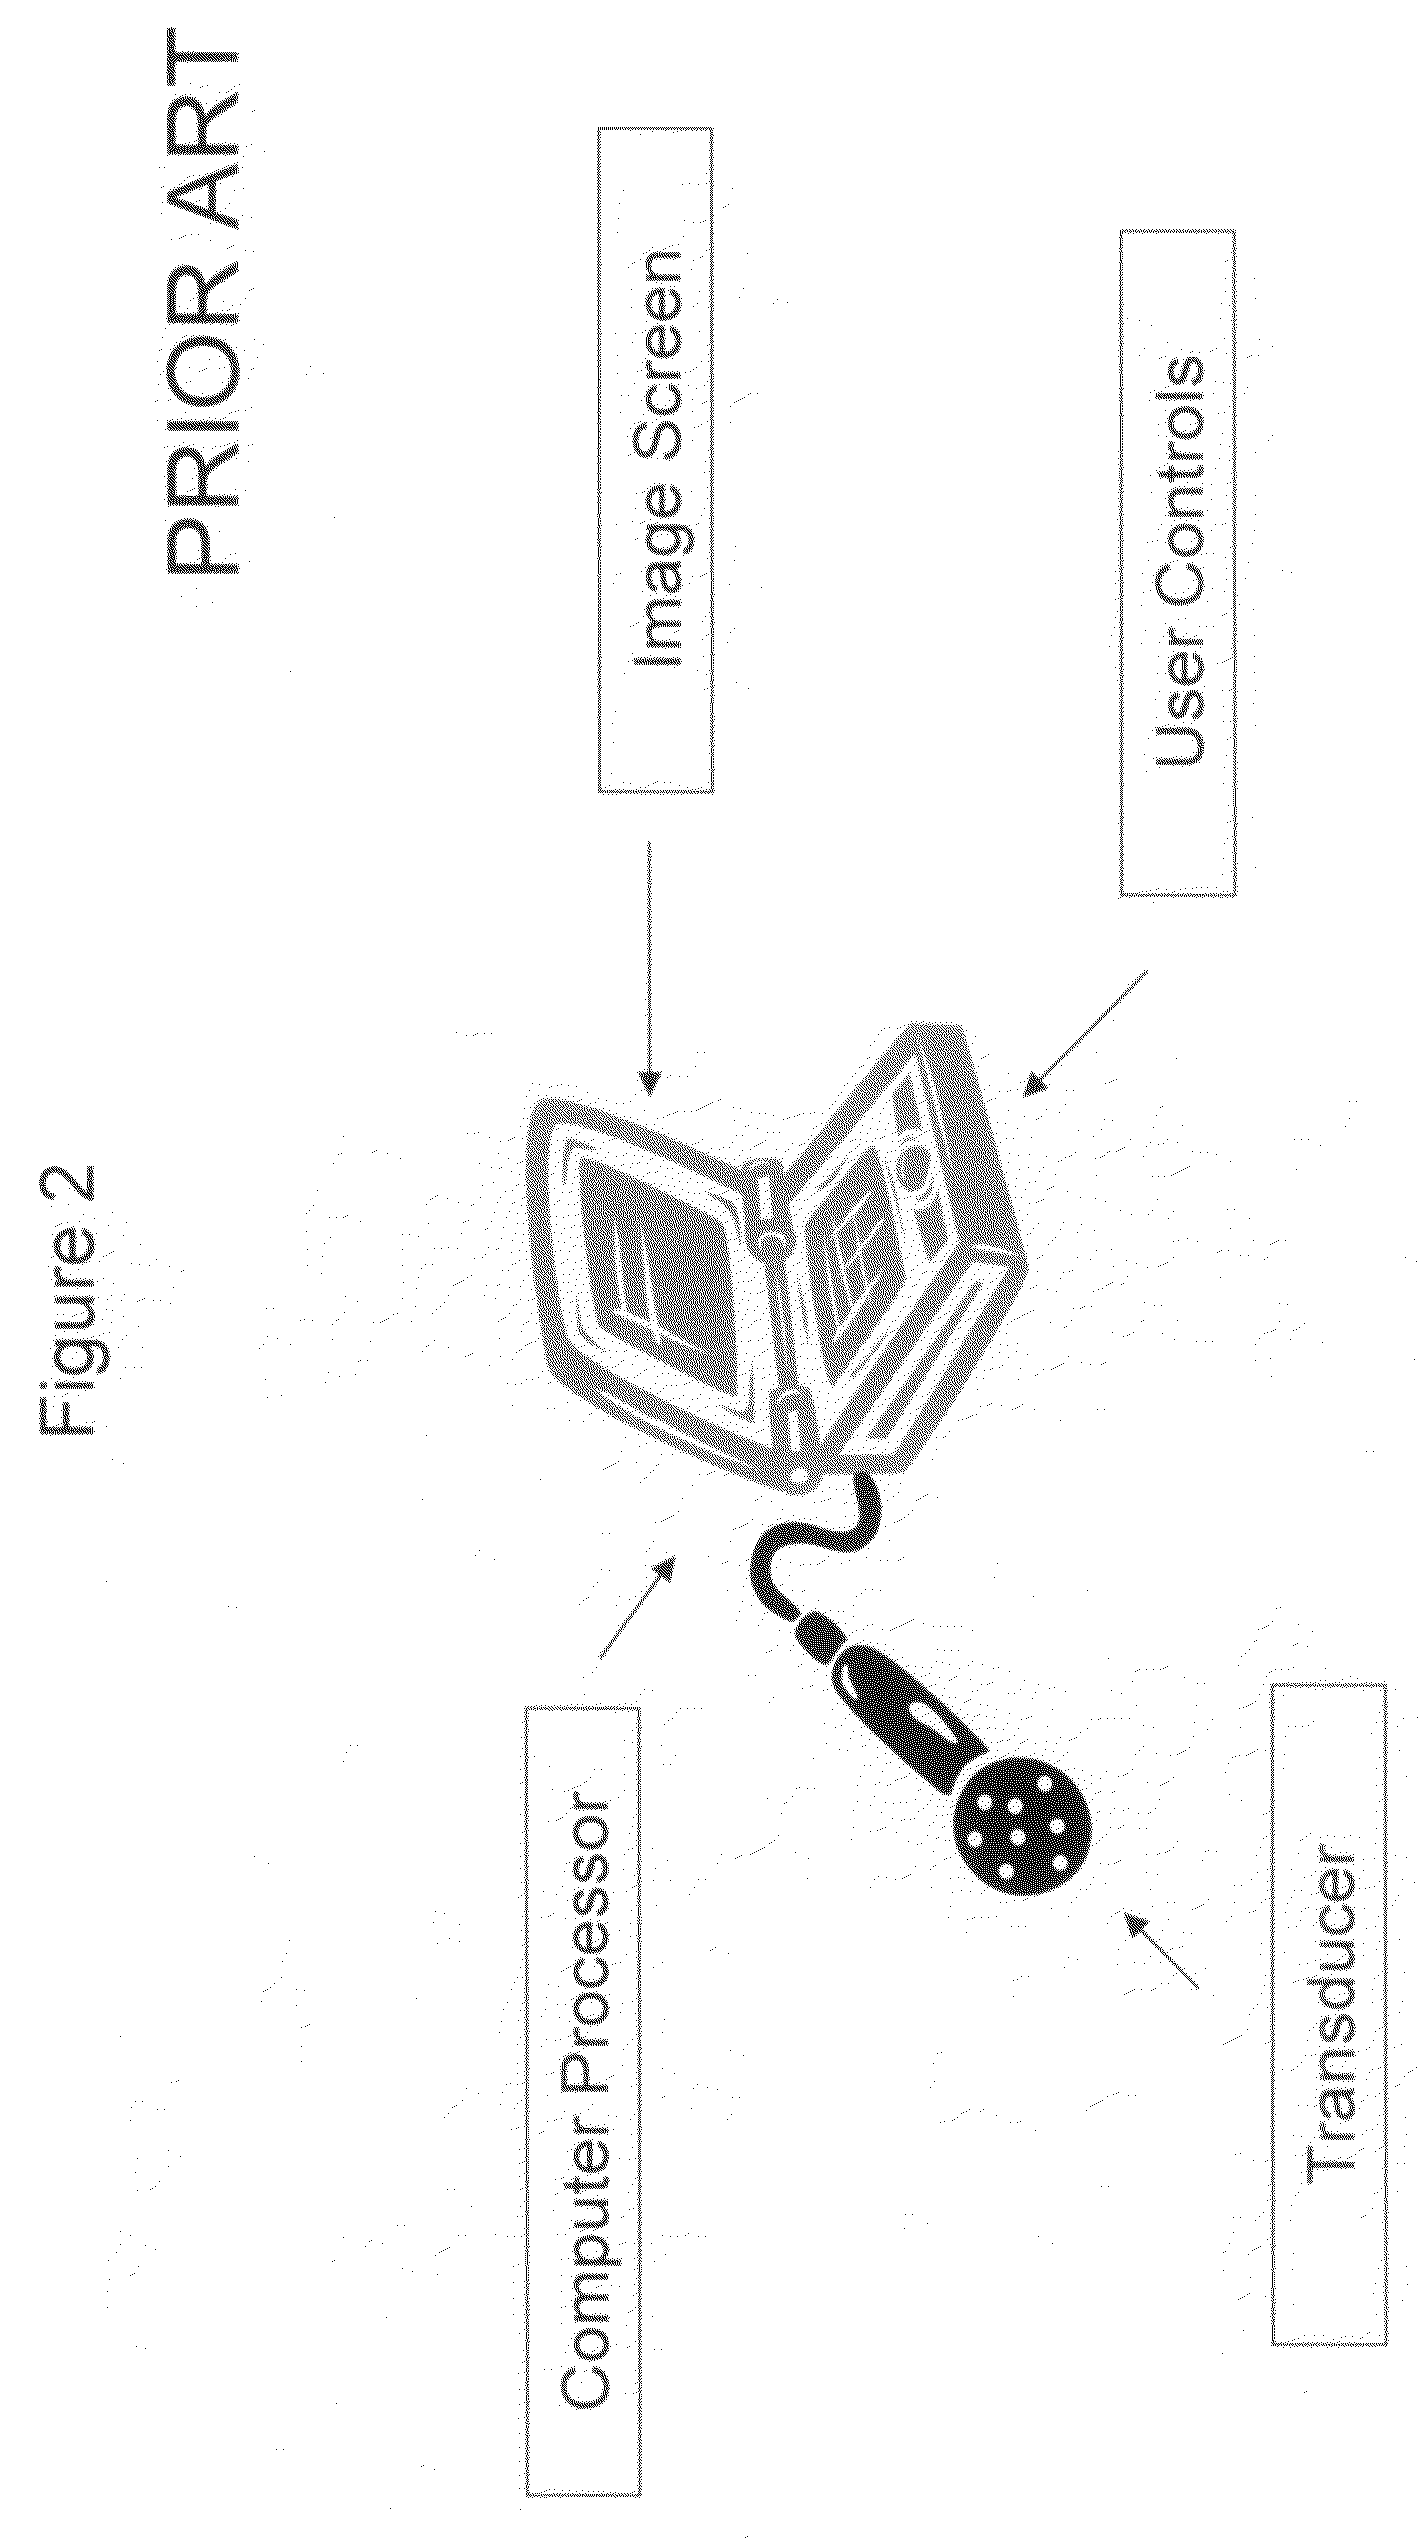 Medical imaging examination review and quality assurance system and method